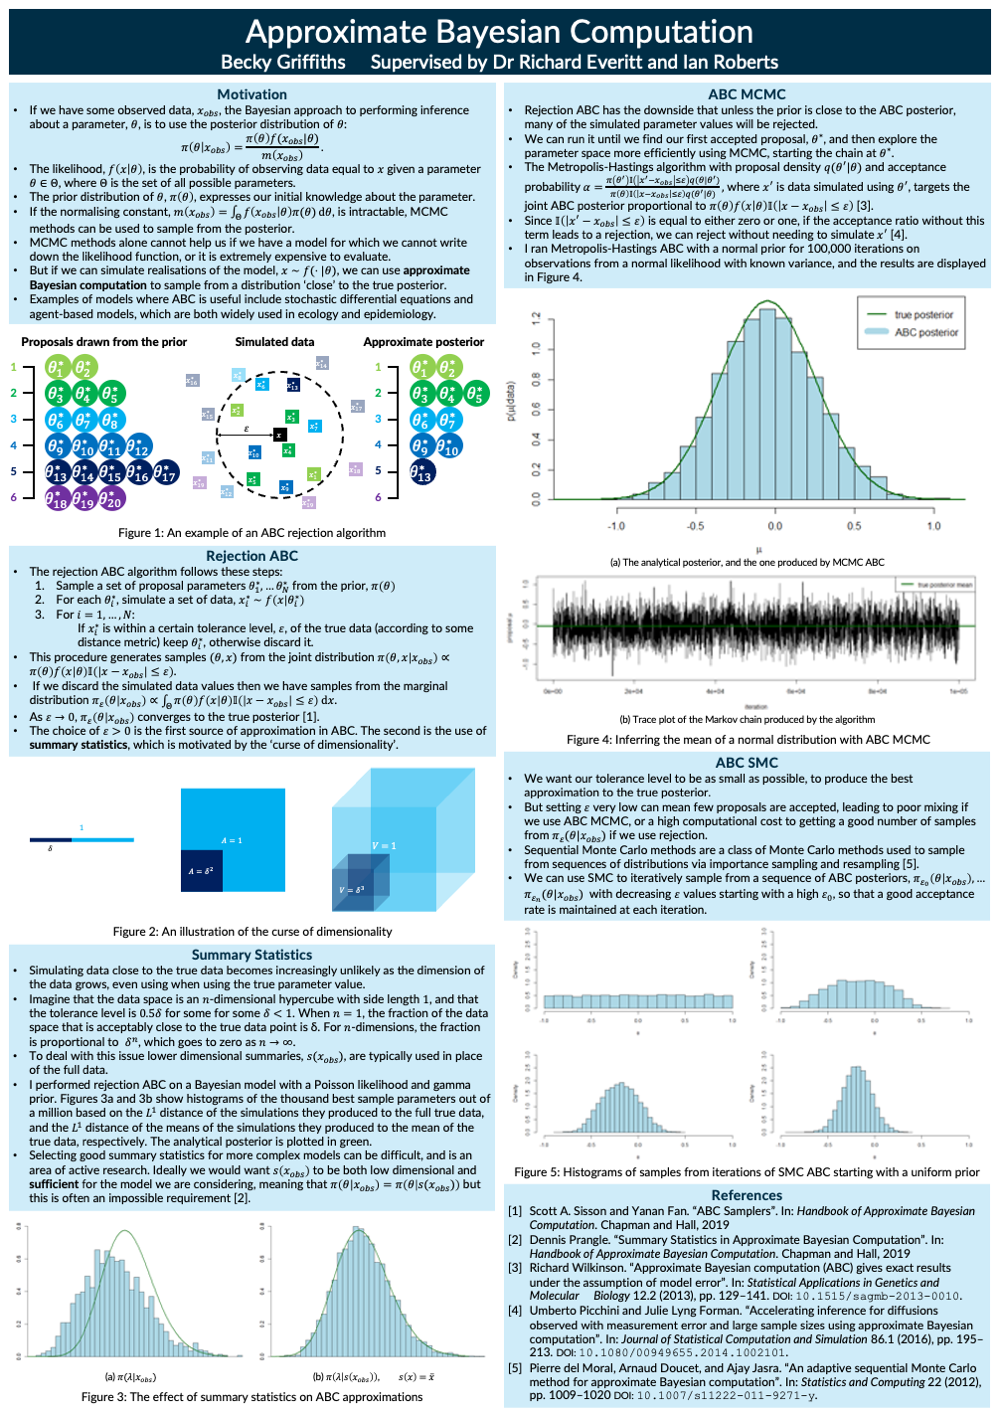 A poster on approximate Bayesian computation.